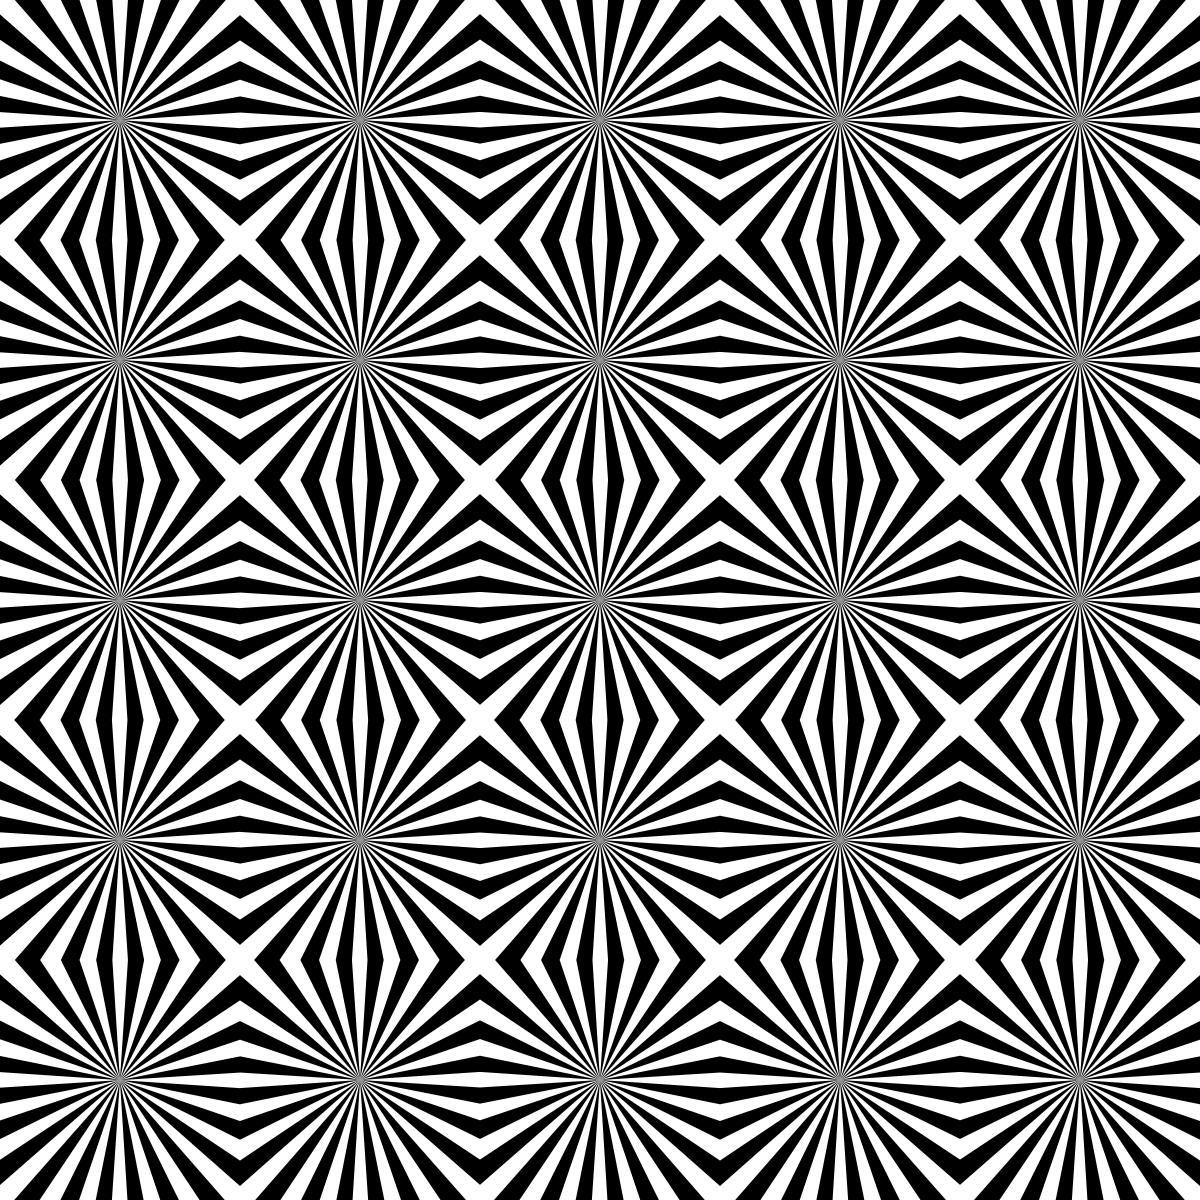 Download Optical illusions image download for free | CorelDraw Design ...